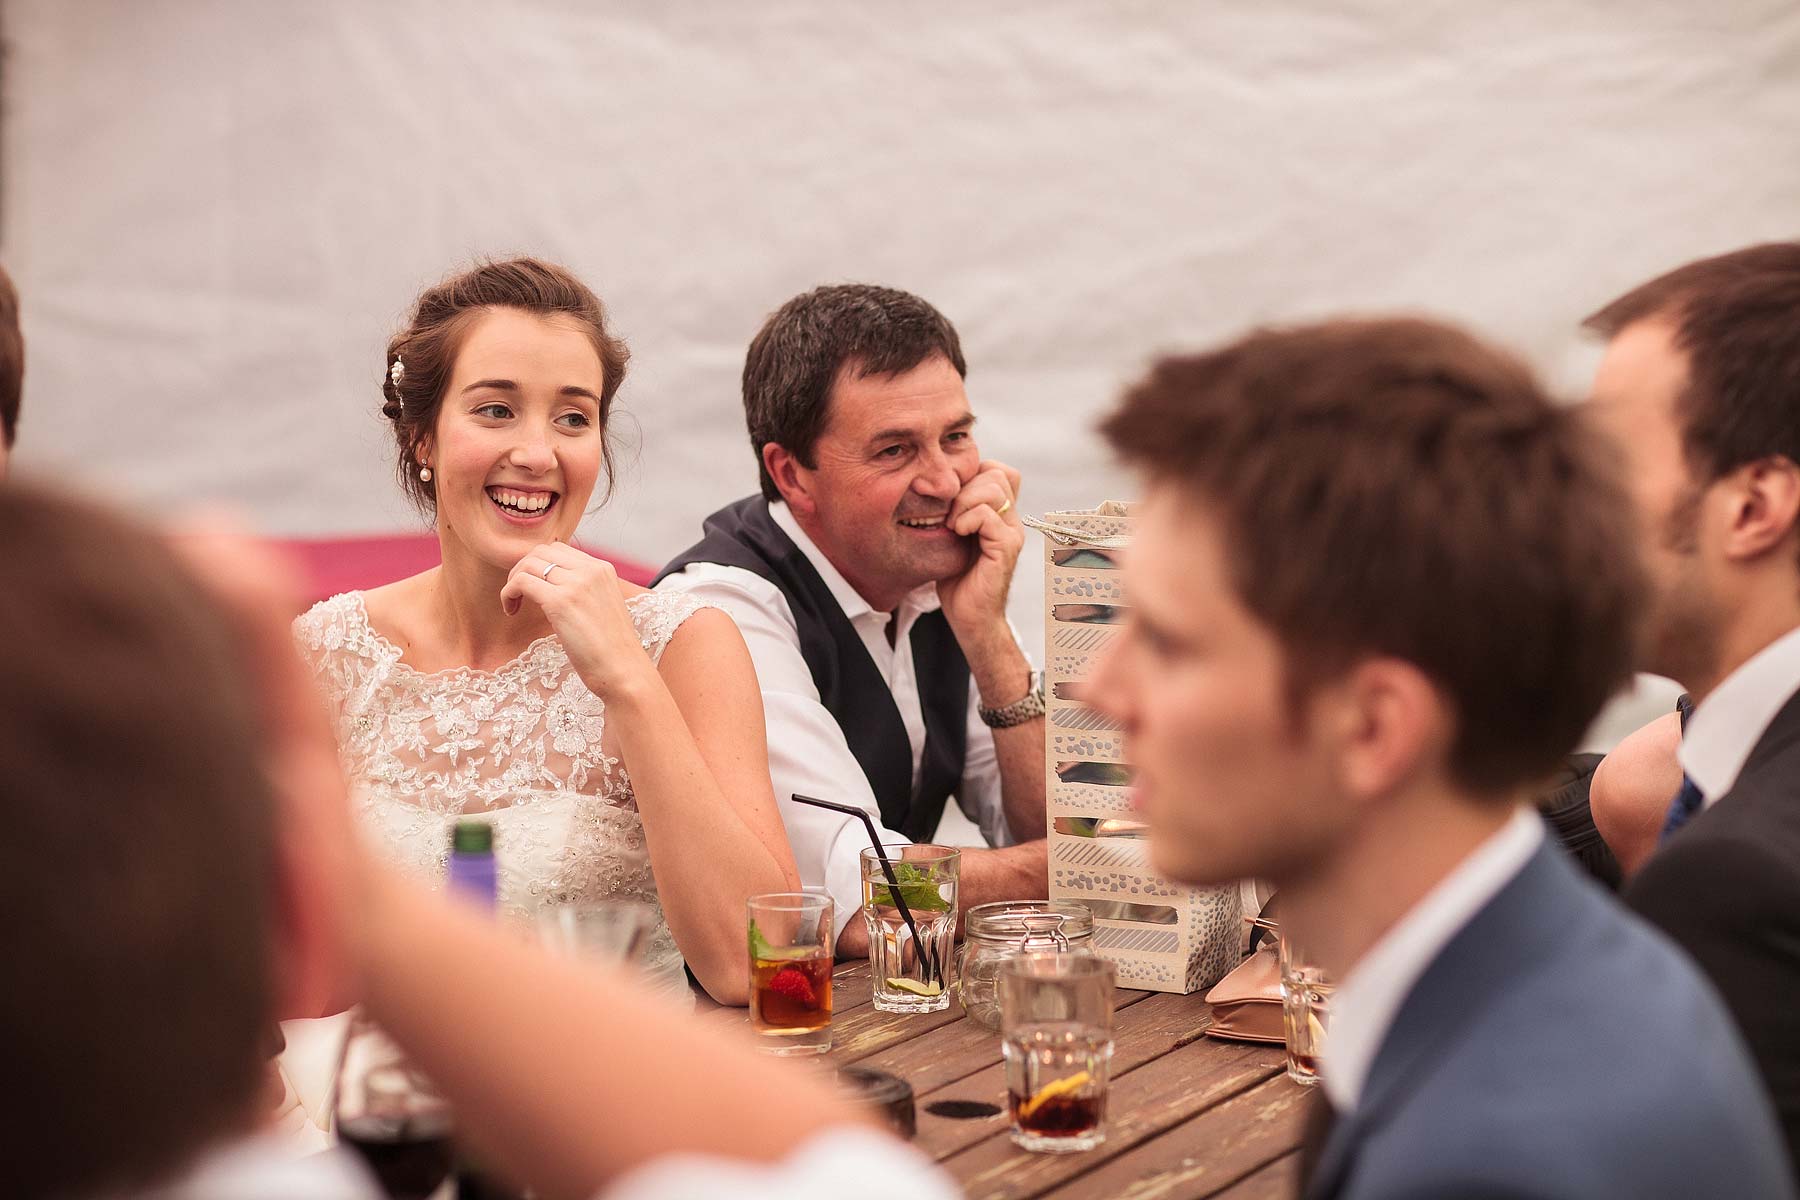 Candid photographs that show the fun of the evening reception in the Tithe Barn at Hundred House Hotel in Norton by Shropshire Documentary Wedding Photographer Stuart James